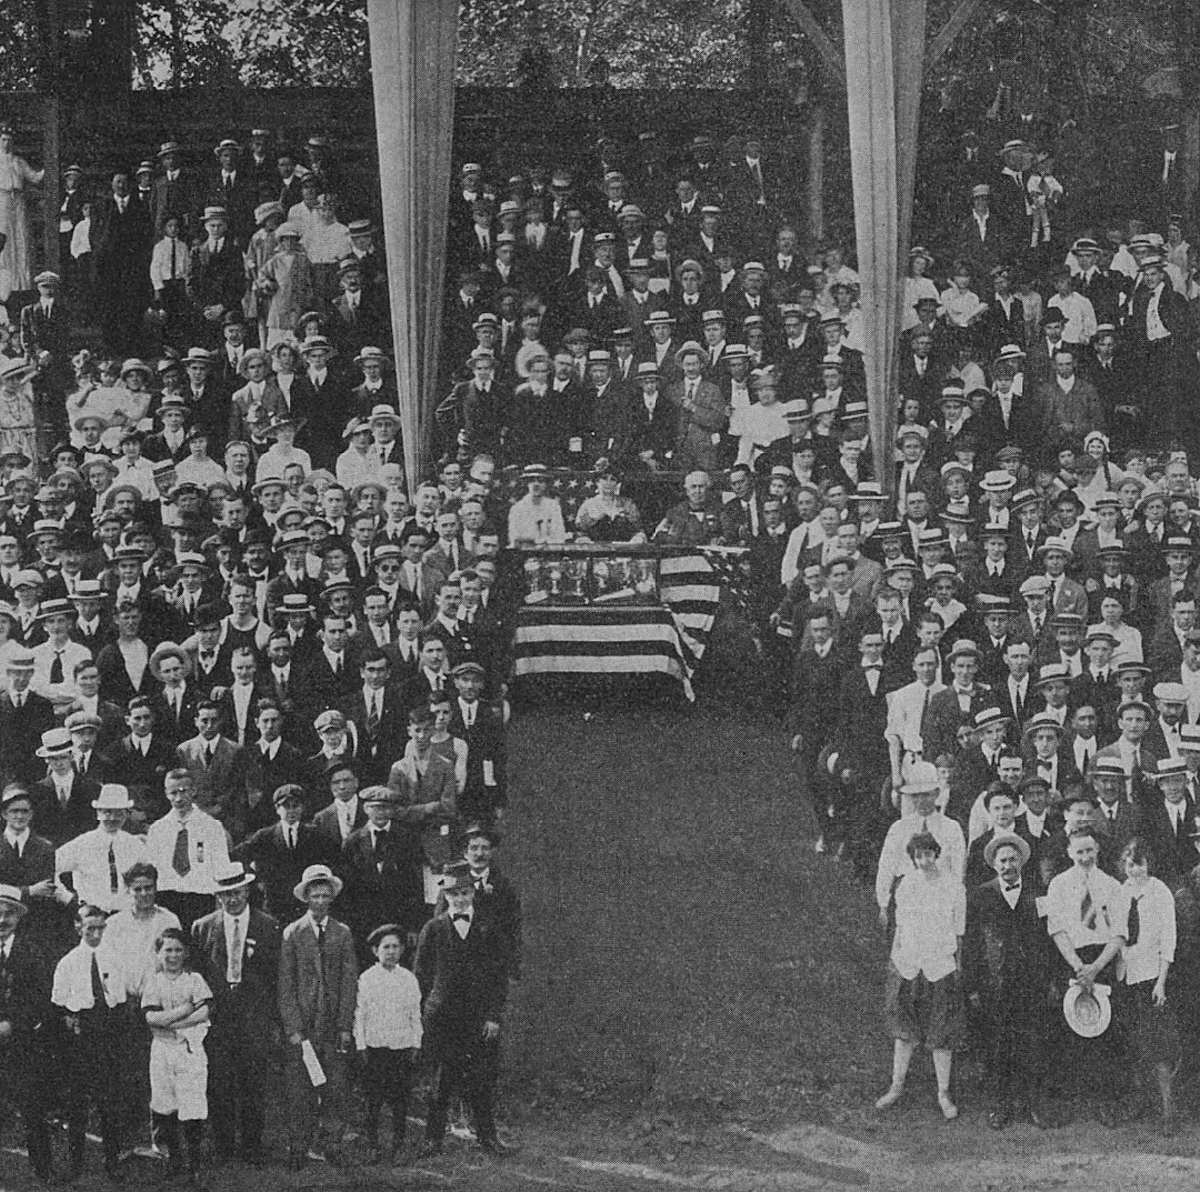 This is about 20% of a larger photo from July 4, 1915 showing Mr. & Mrs Thomas Edison and their employees from the Edison Laboratories on a field day at Olympic Park.

From “Library of Congress”
